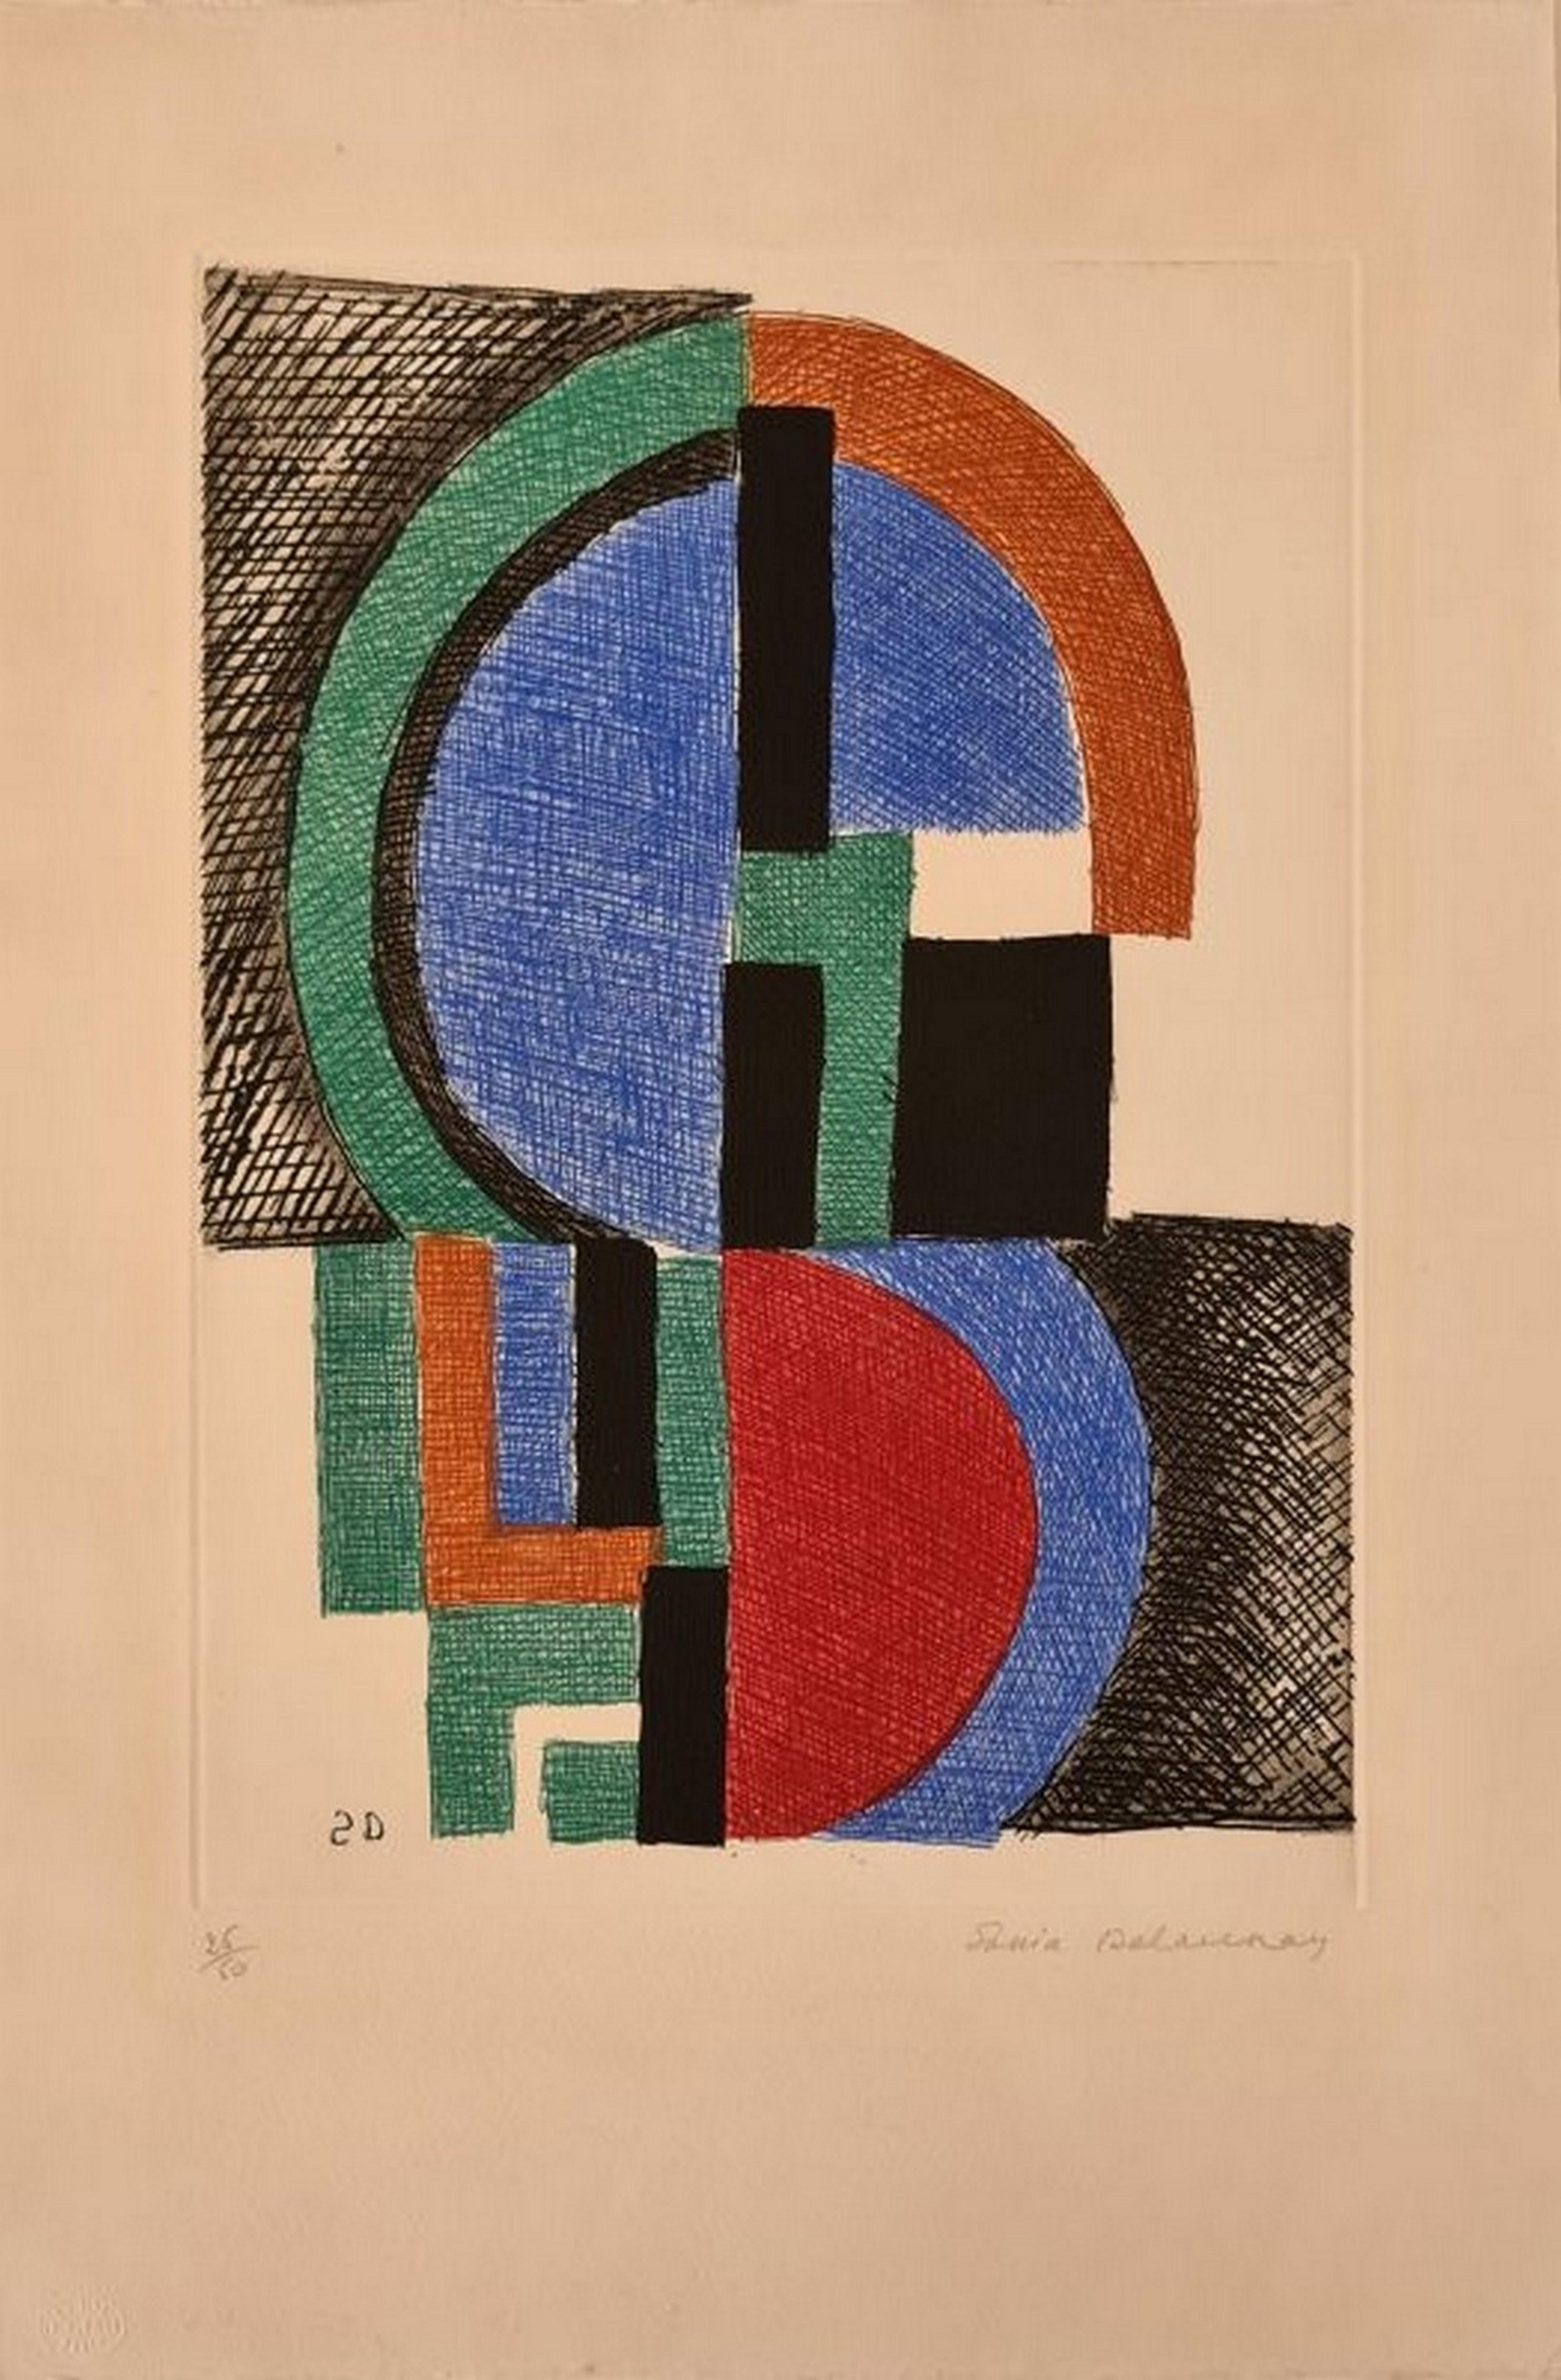 Sonia Delaunay Abstract Print - Composition 